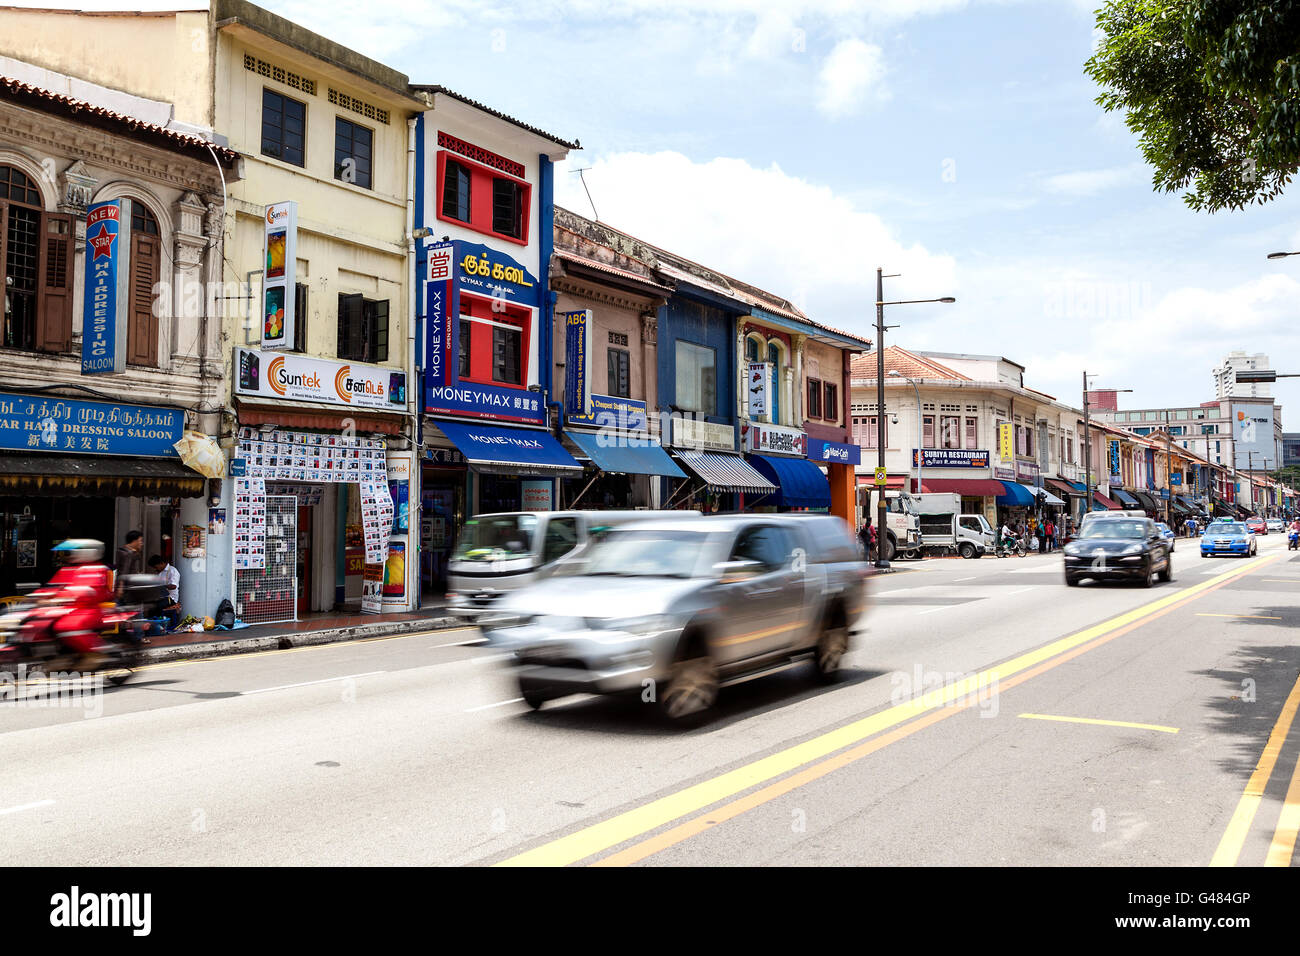 Singapore, Singapore - March 24, 2015: Old vintage shophouses along Little India in Singapore. Stock Photo